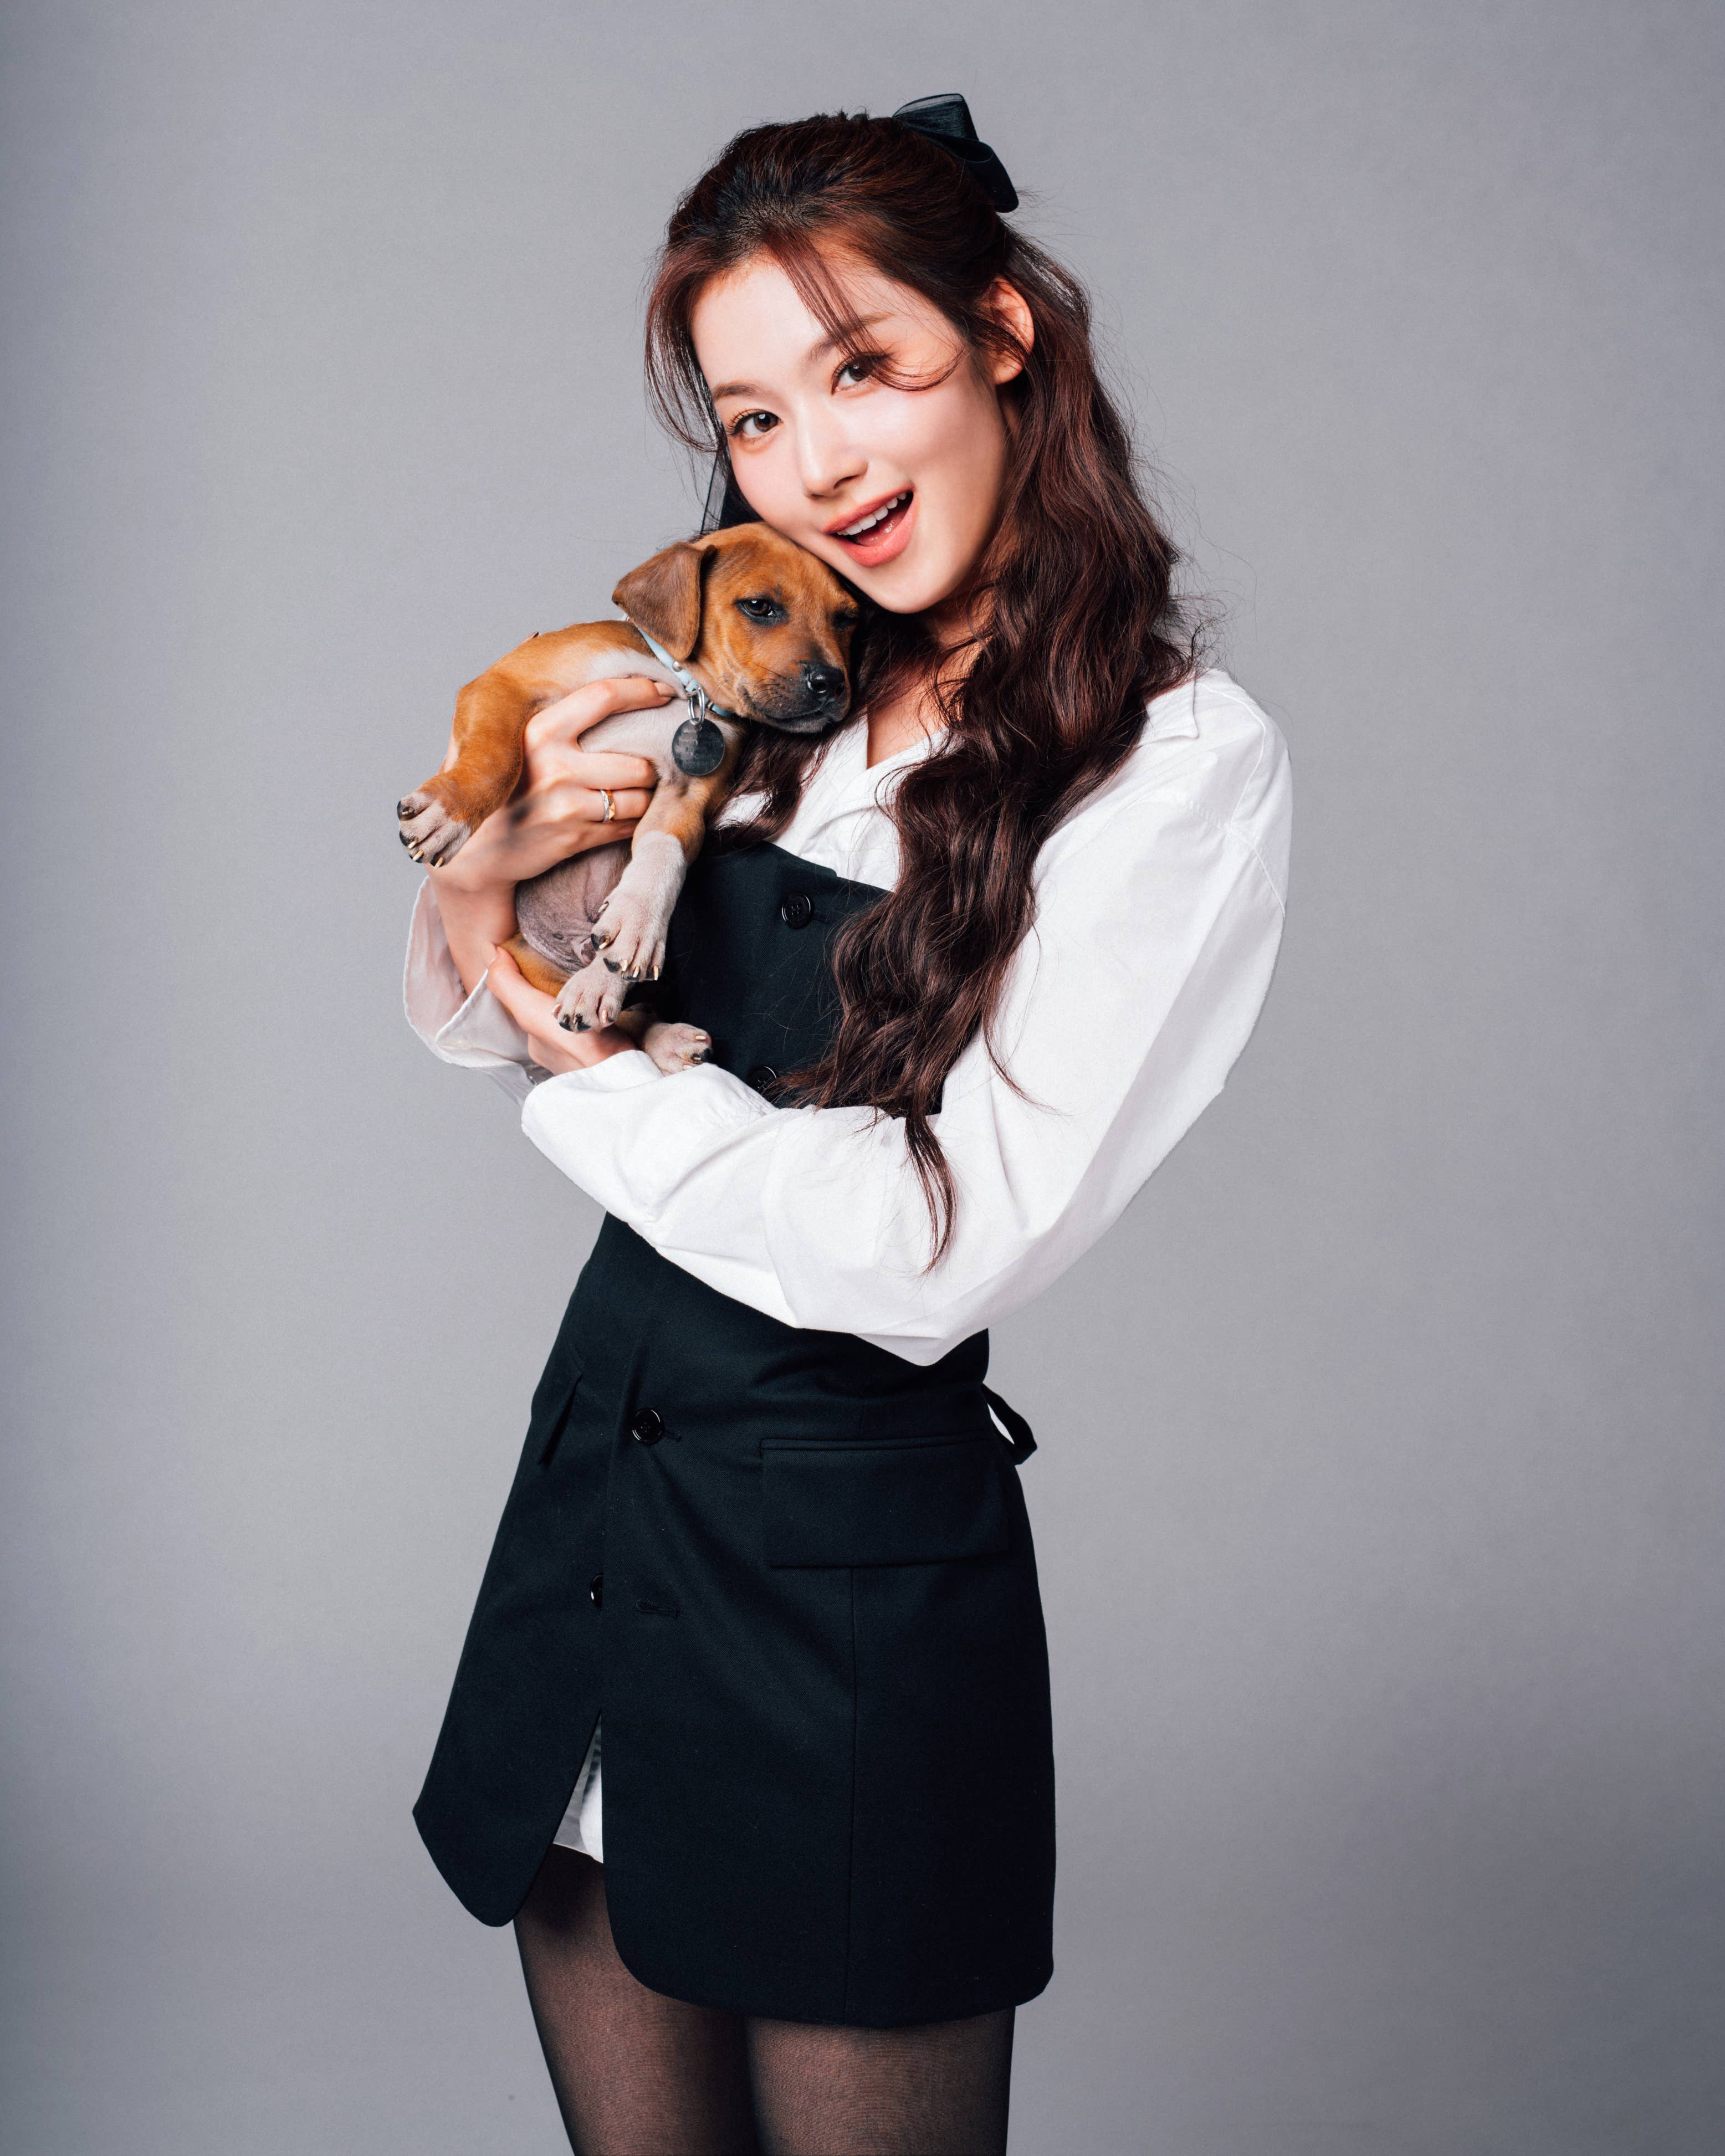 Woman holding a puppy, wearing a business casual outfit with a bow in her hair